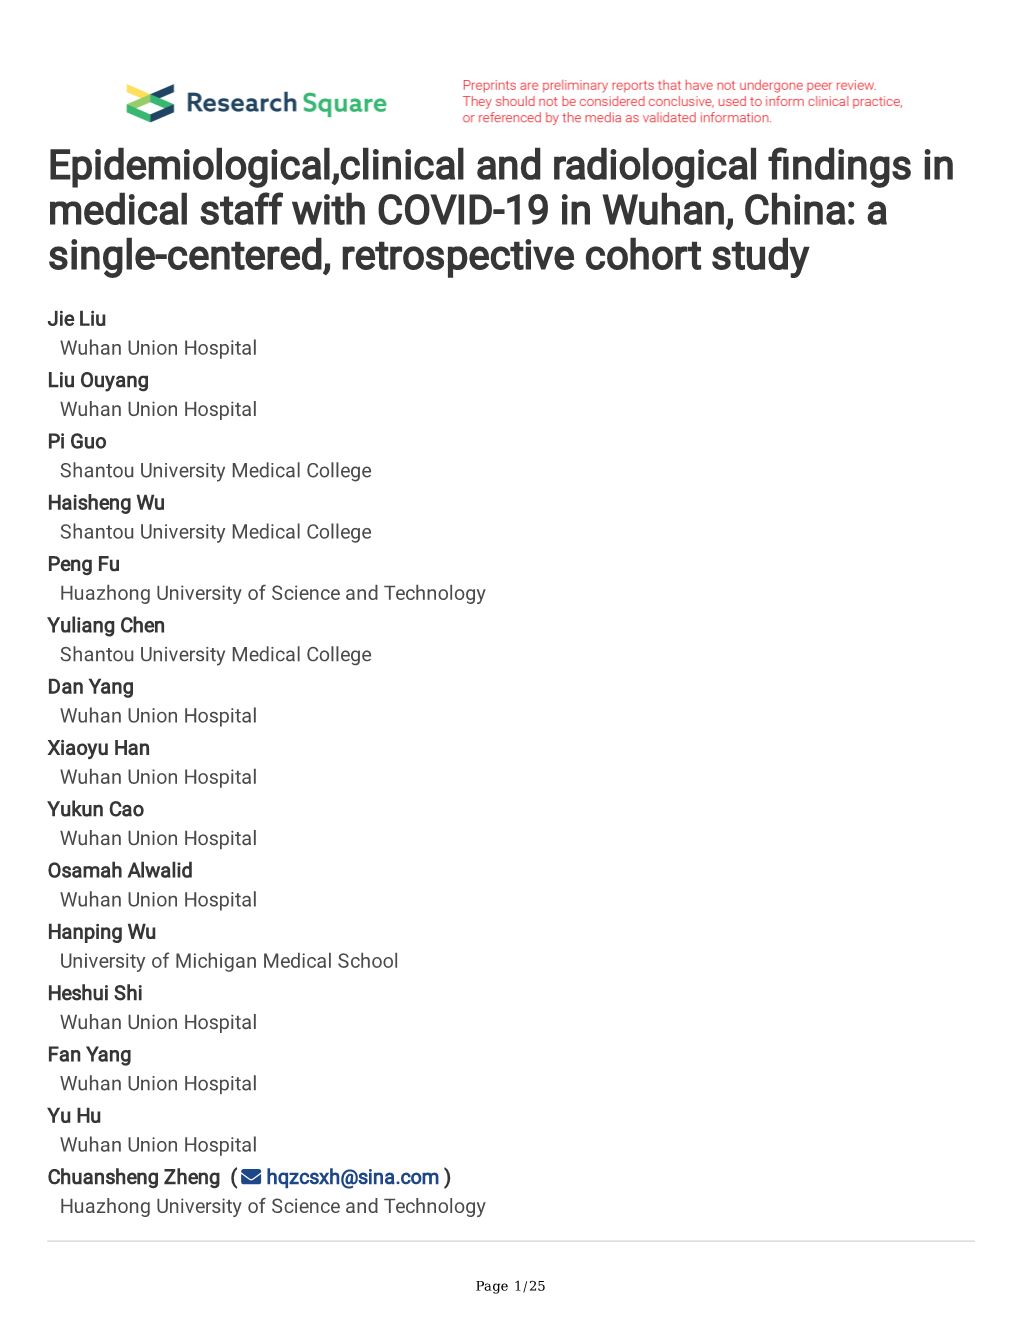 Epidemiological,Clinical and Radiological Ndings in Medical Staff with COVID-19 in Wuhan, China